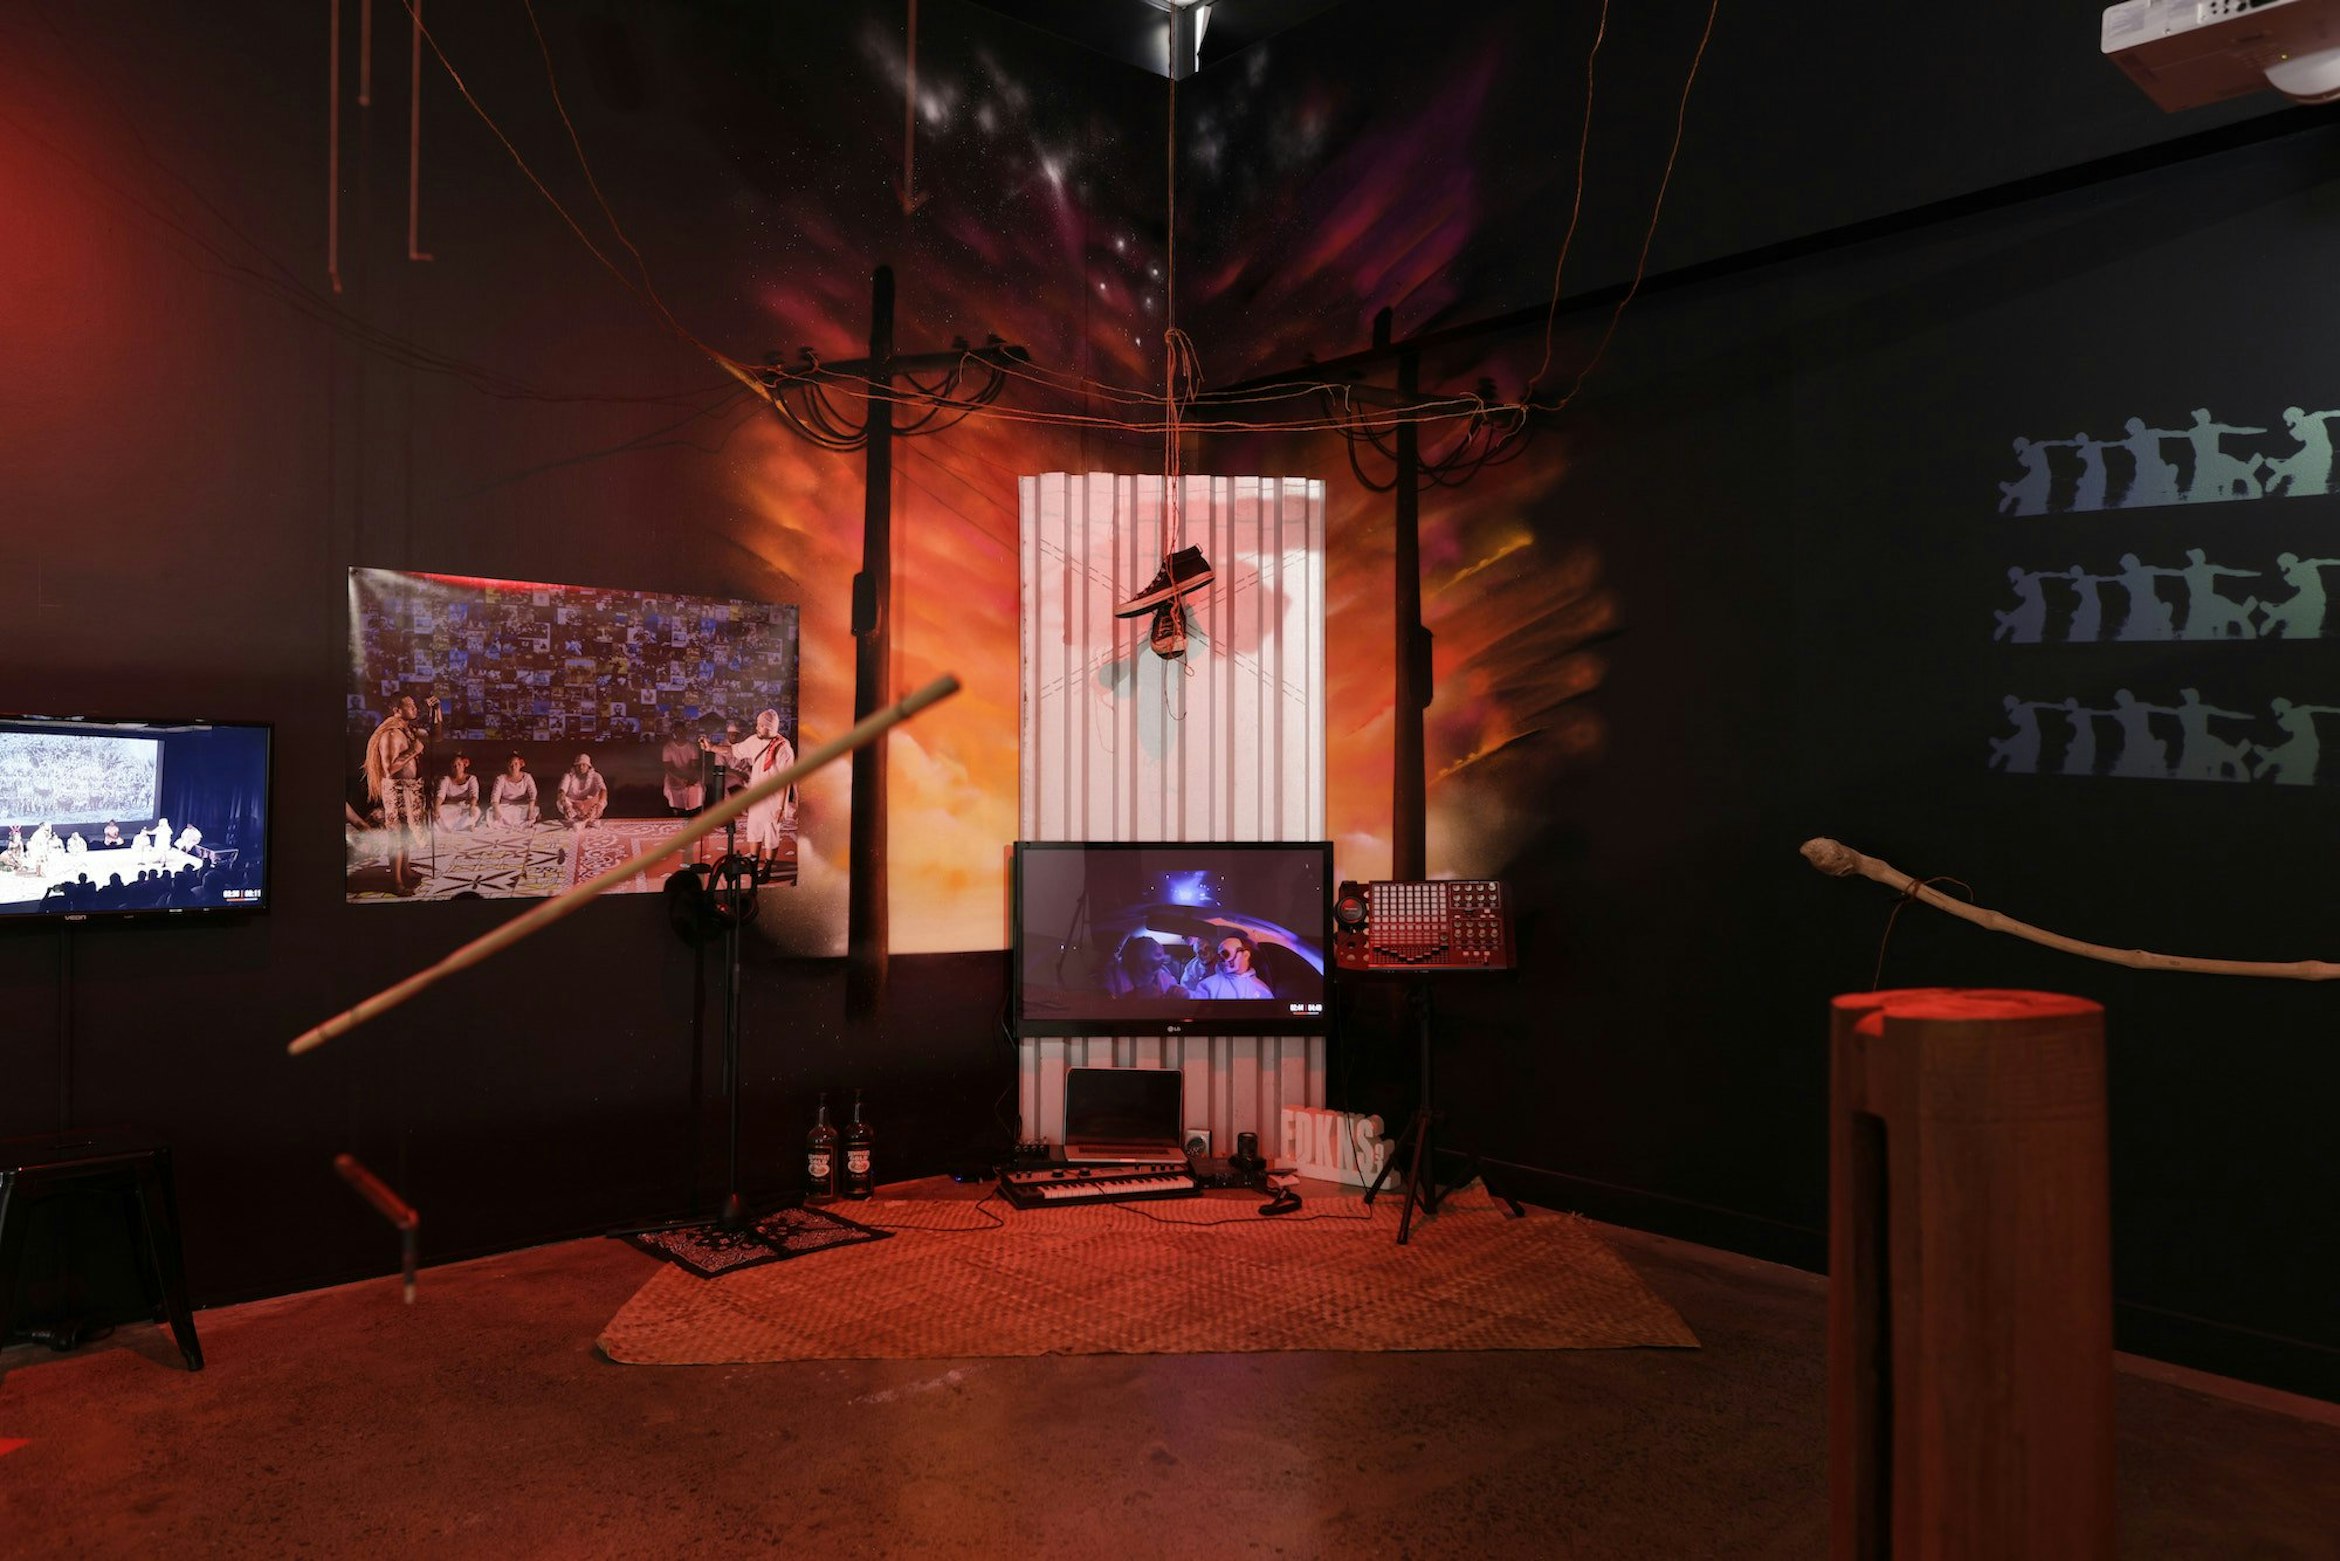 A dense multi-media installation including TV monitors, a pair of hanging sneakers, a computer, Pasifika musical instruments, stencil on the wall and more.